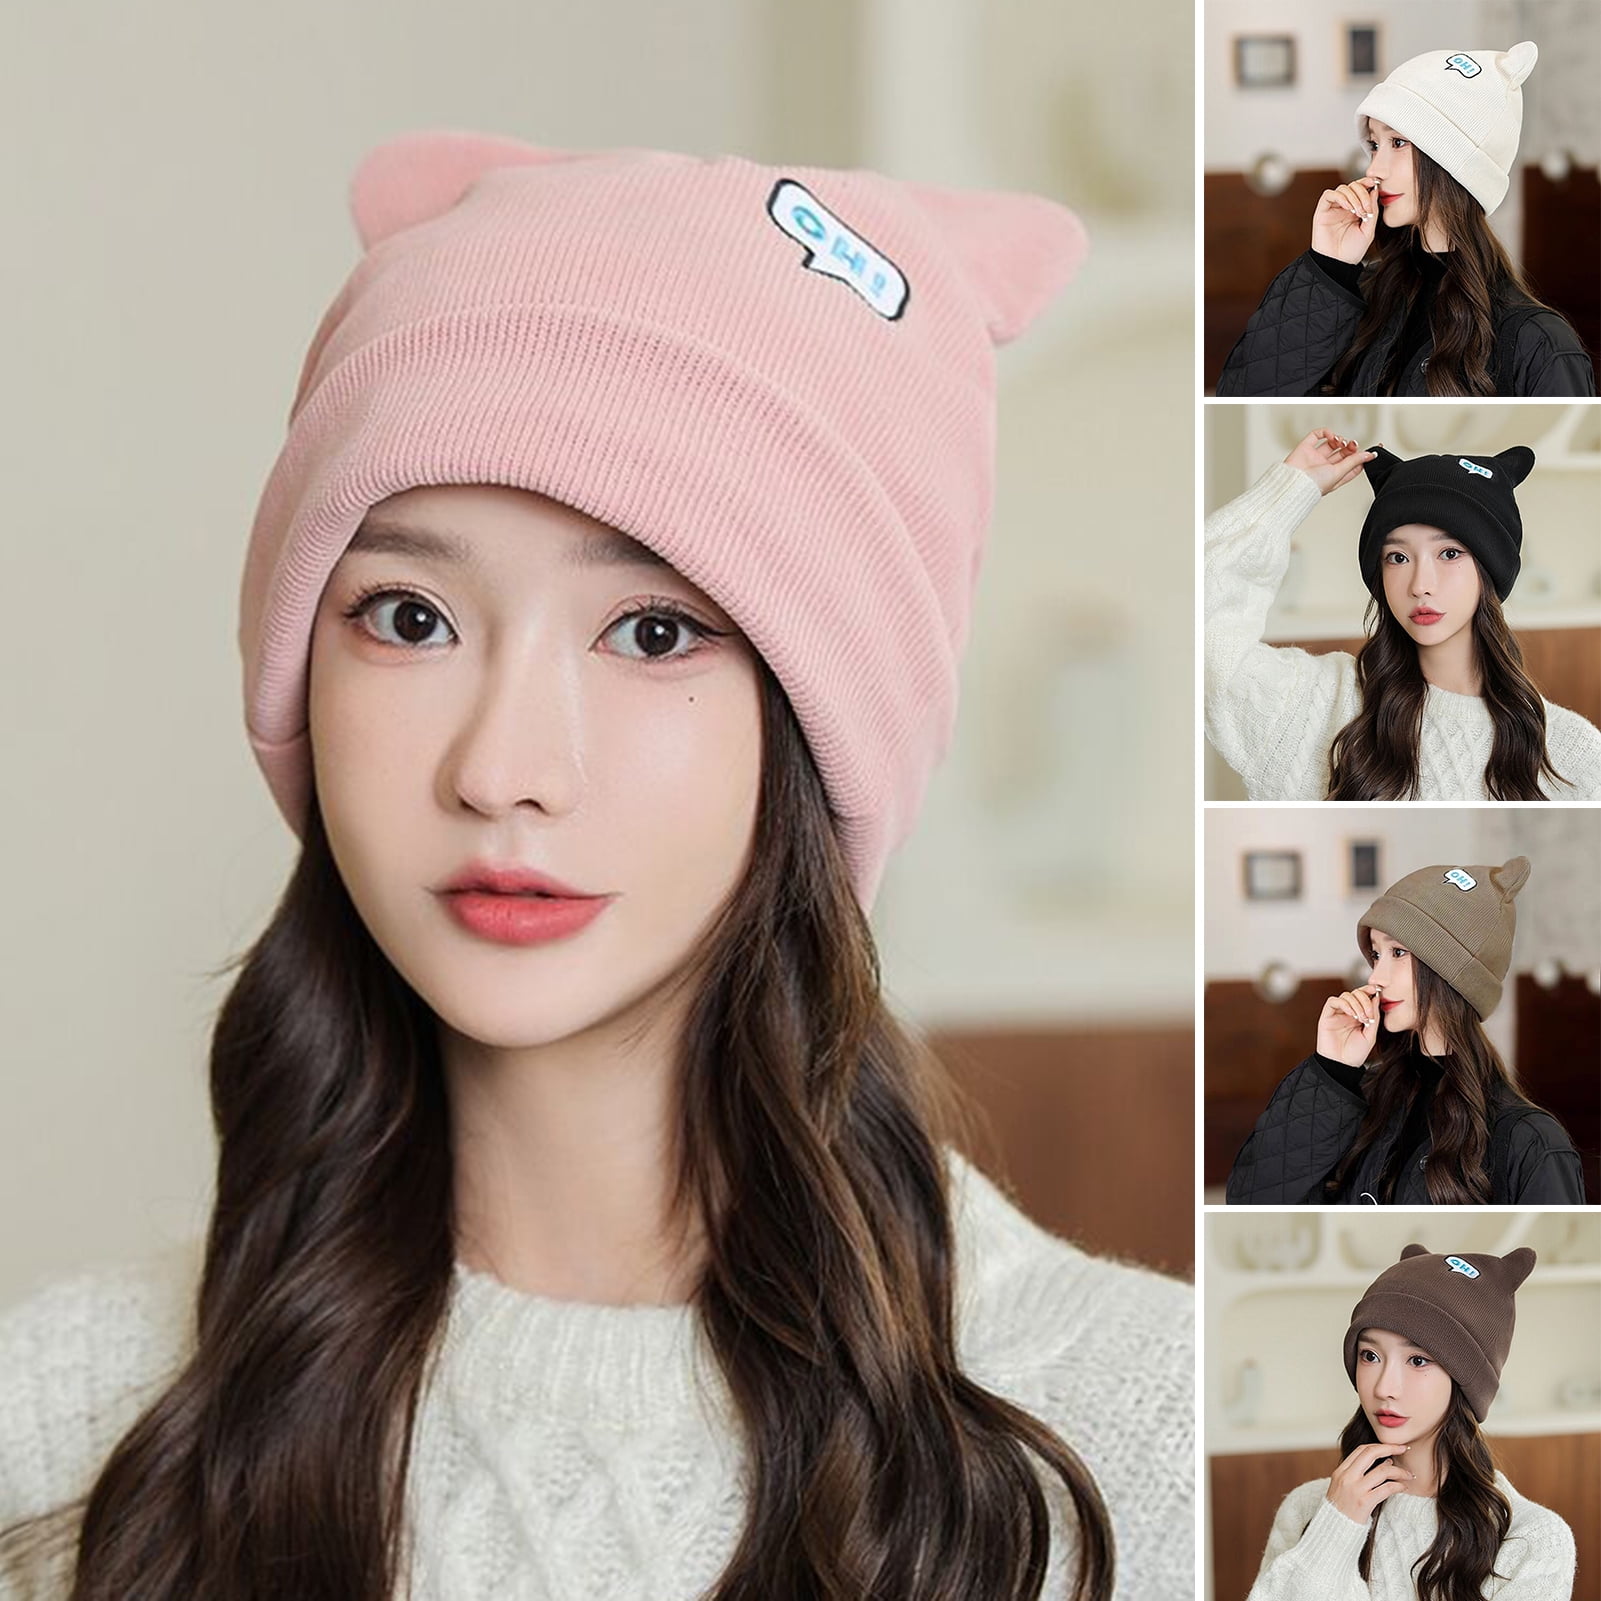 GROFRY Women Beanie Hat Ears Solid Color Letters Brimless Dome Windproof  Korean Style Knitting Cap for Outdoor Skiing Cycling